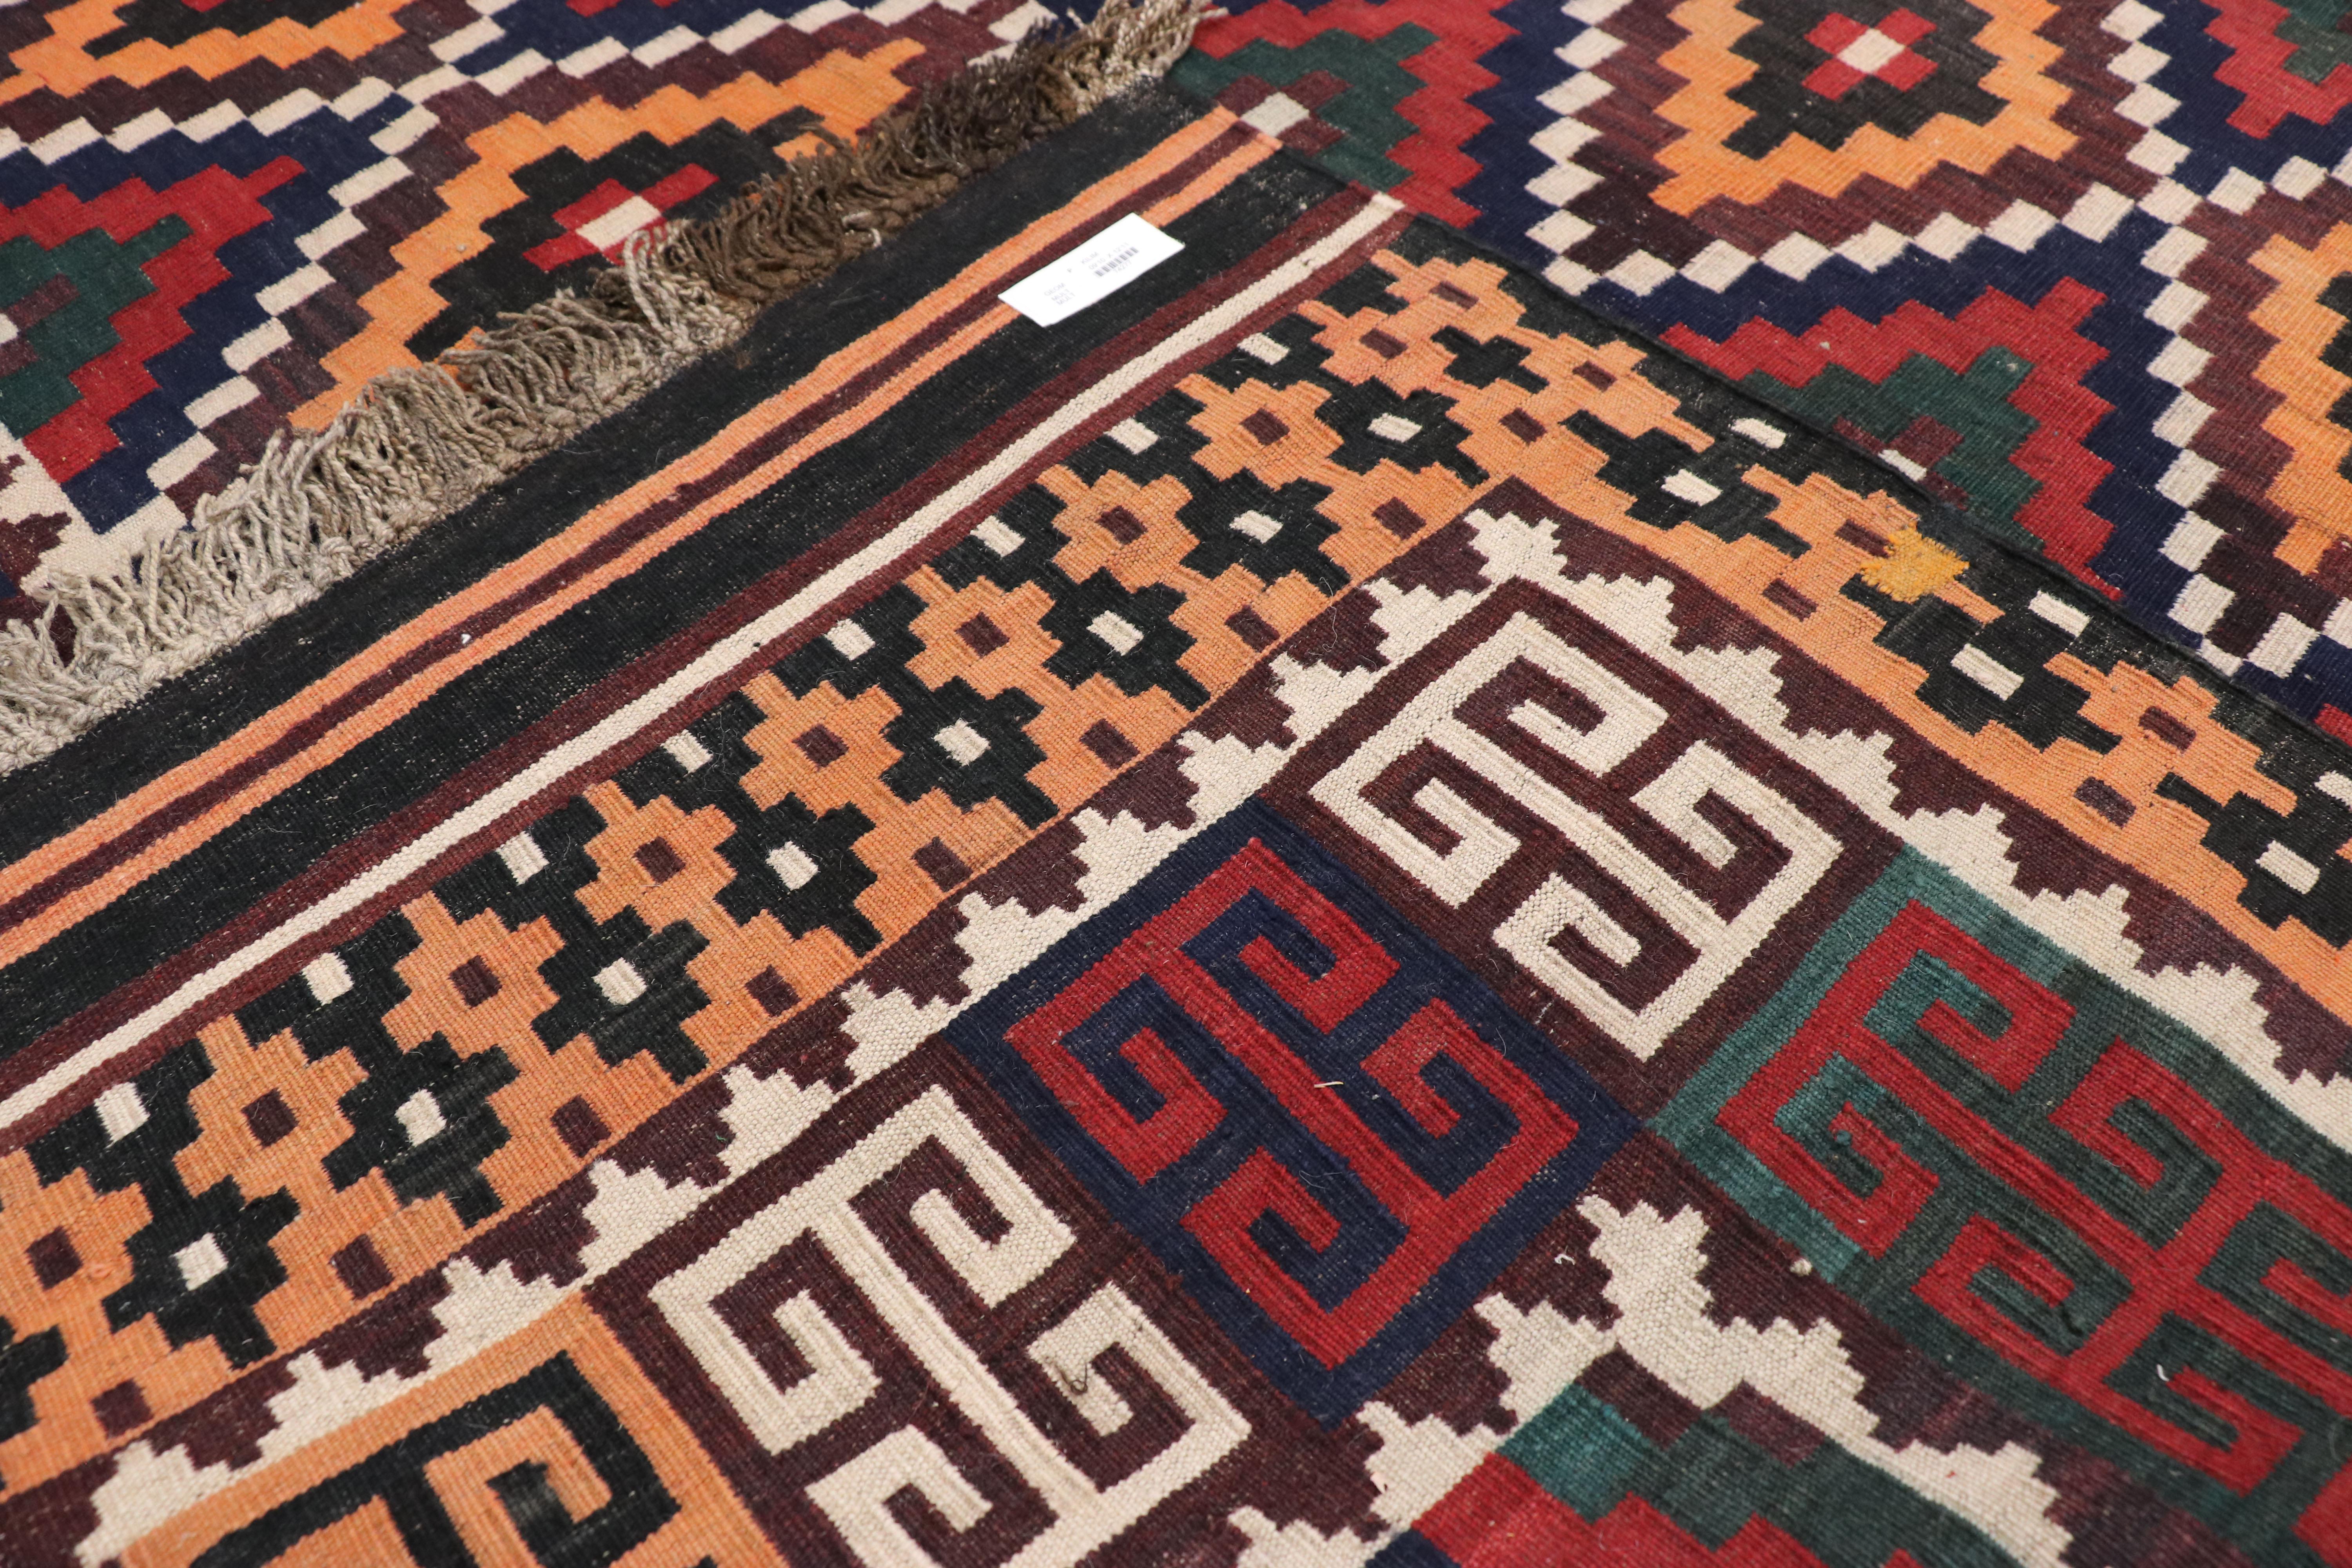 Vintage Afghan Ghalmouri Maimana Kilim Rug, Nomadic Charm Meets Tribal Allure In Good Condition For Sale In Dallas, TX